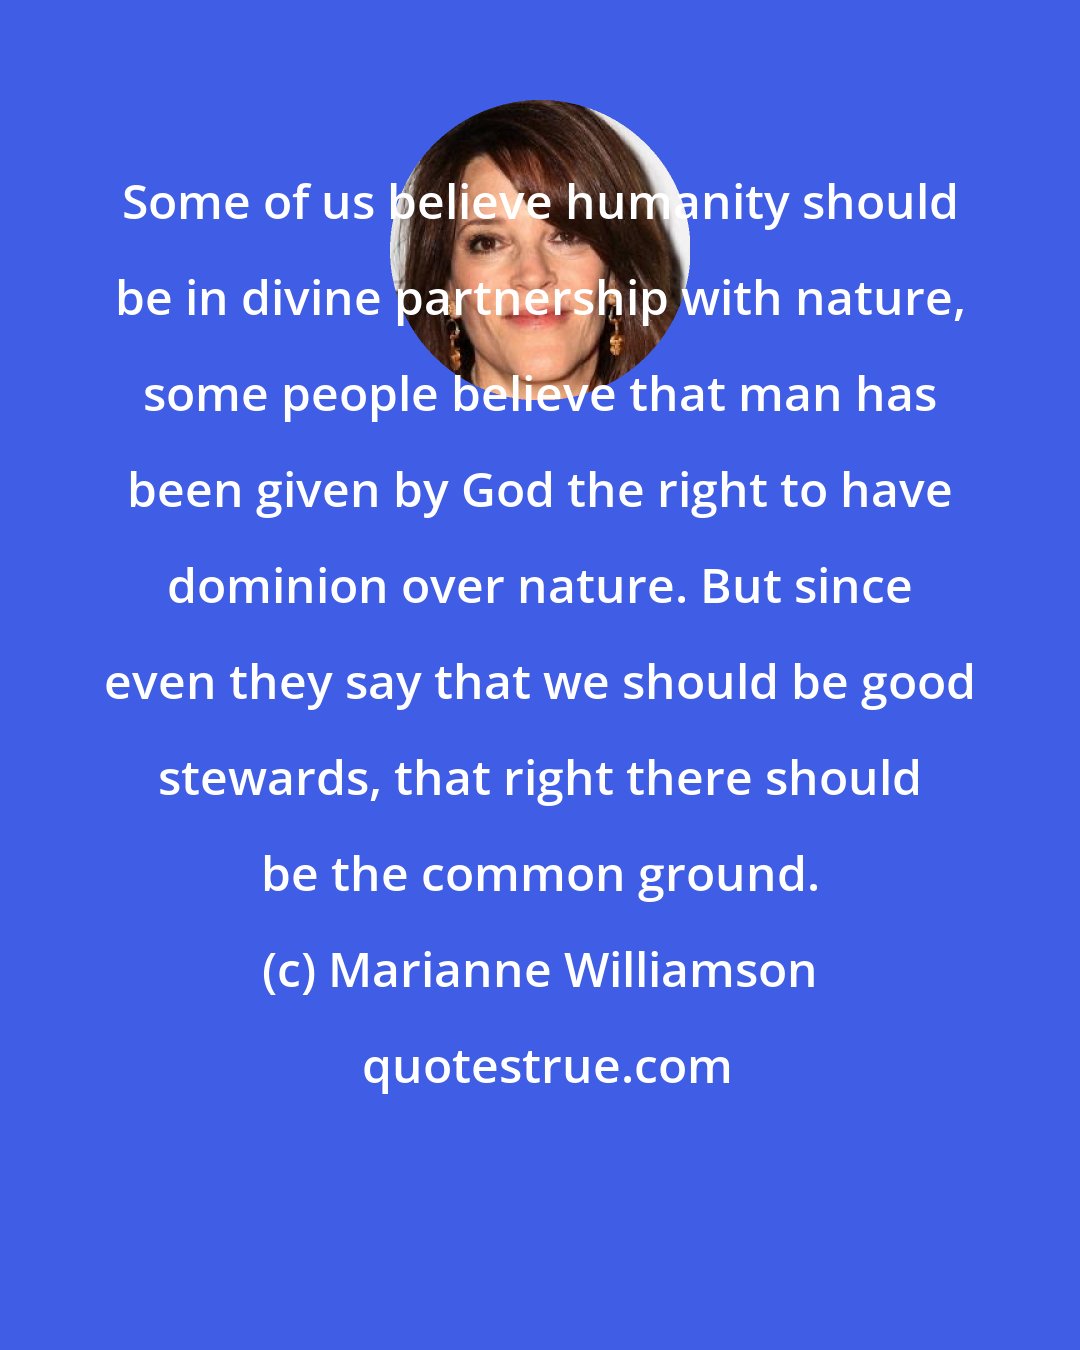 Marianne Williamson: Some of us believe humanity should be in divine partnership with nature, some people believe that man has been given by God the right to have dominion over nature. But since even they say that we should be good stewards, that right there should be the common ground.